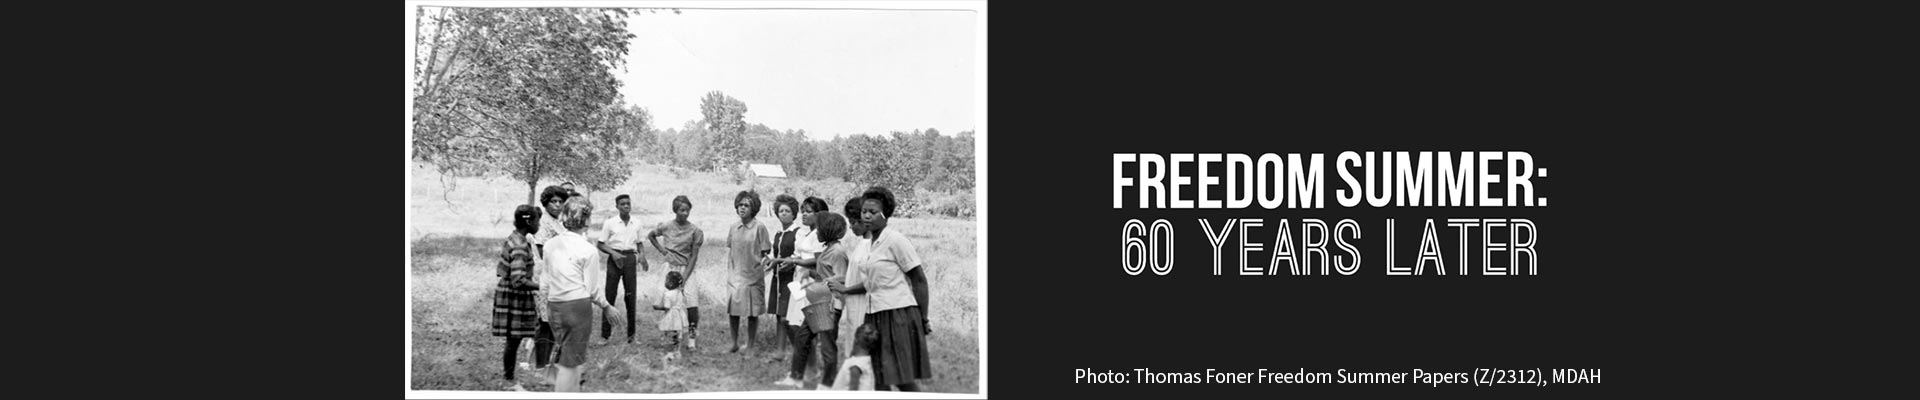 Freedom Summer 60 Years Later